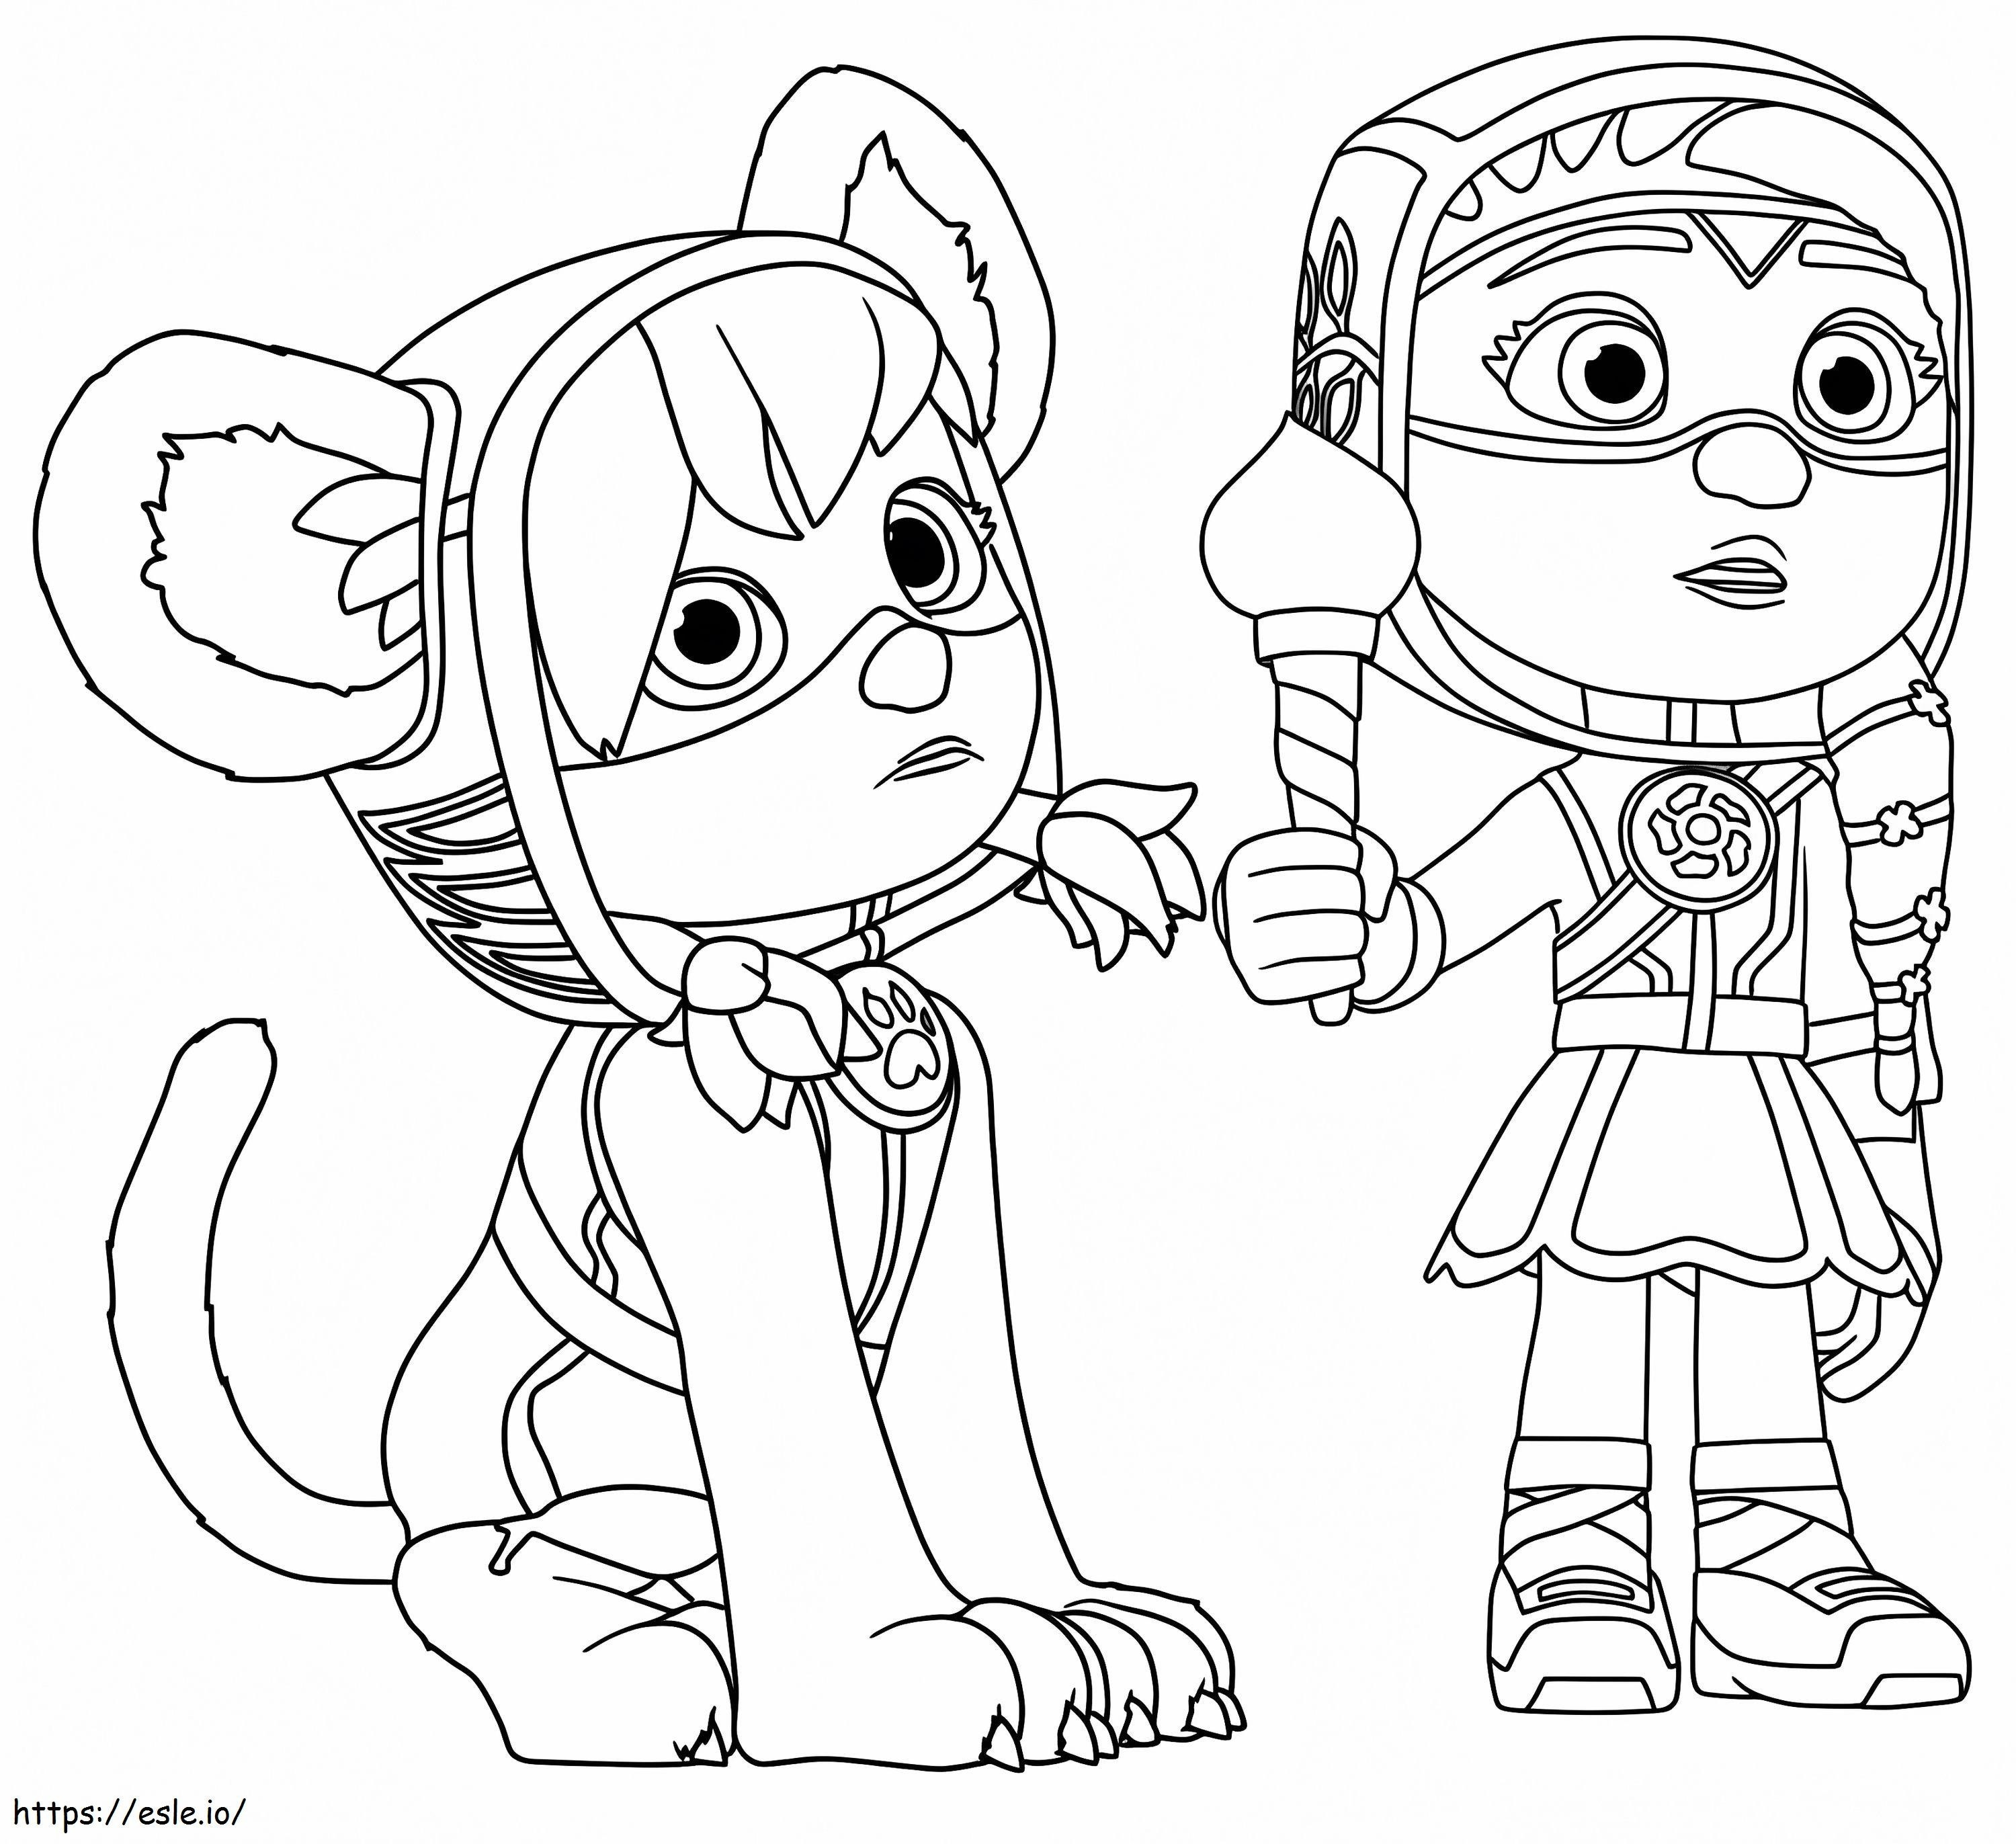 Wren And Treena coloring page